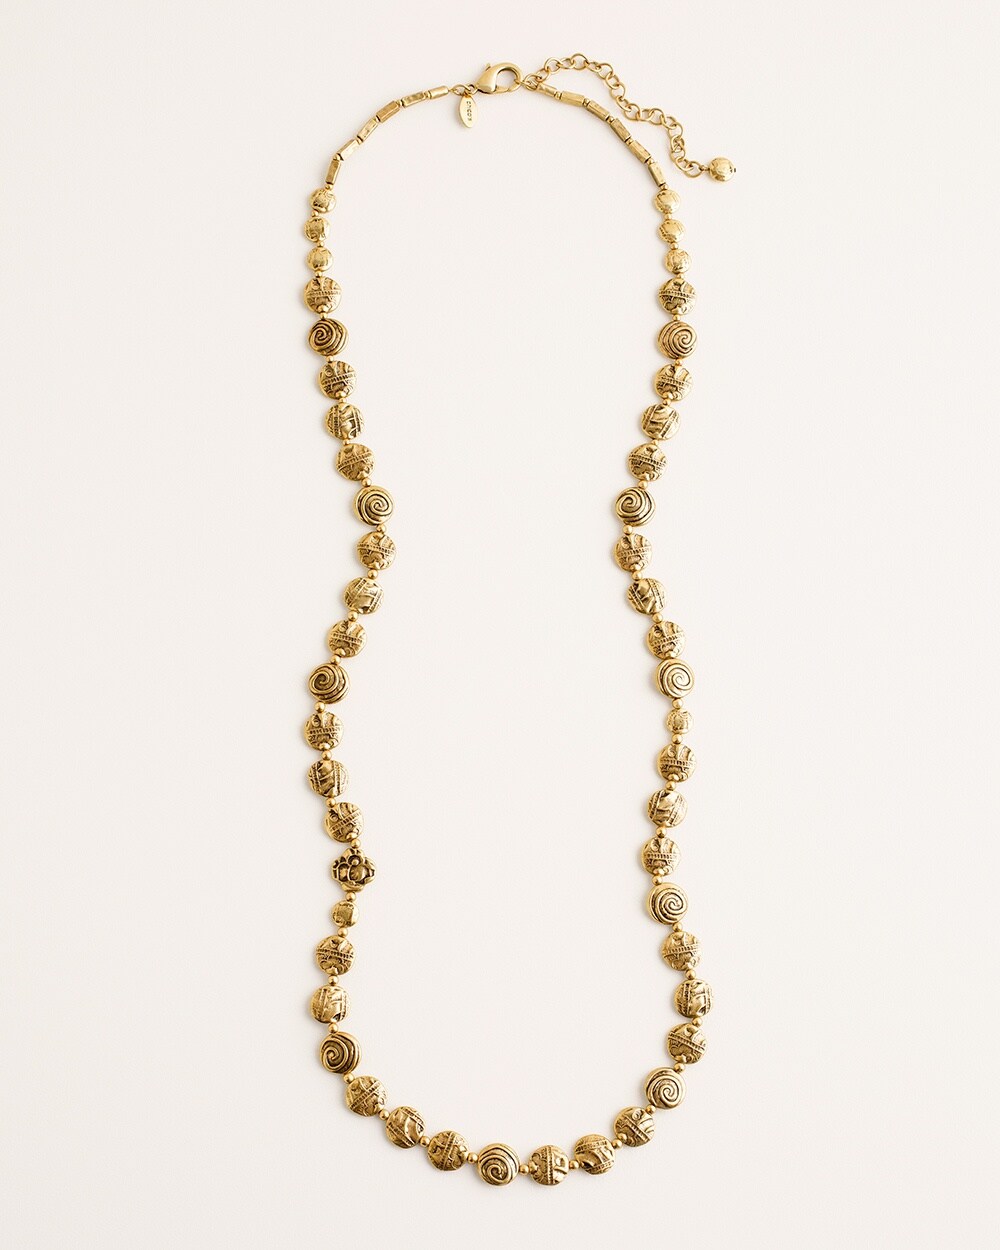 Long Textured Bronze-Colored Necklace